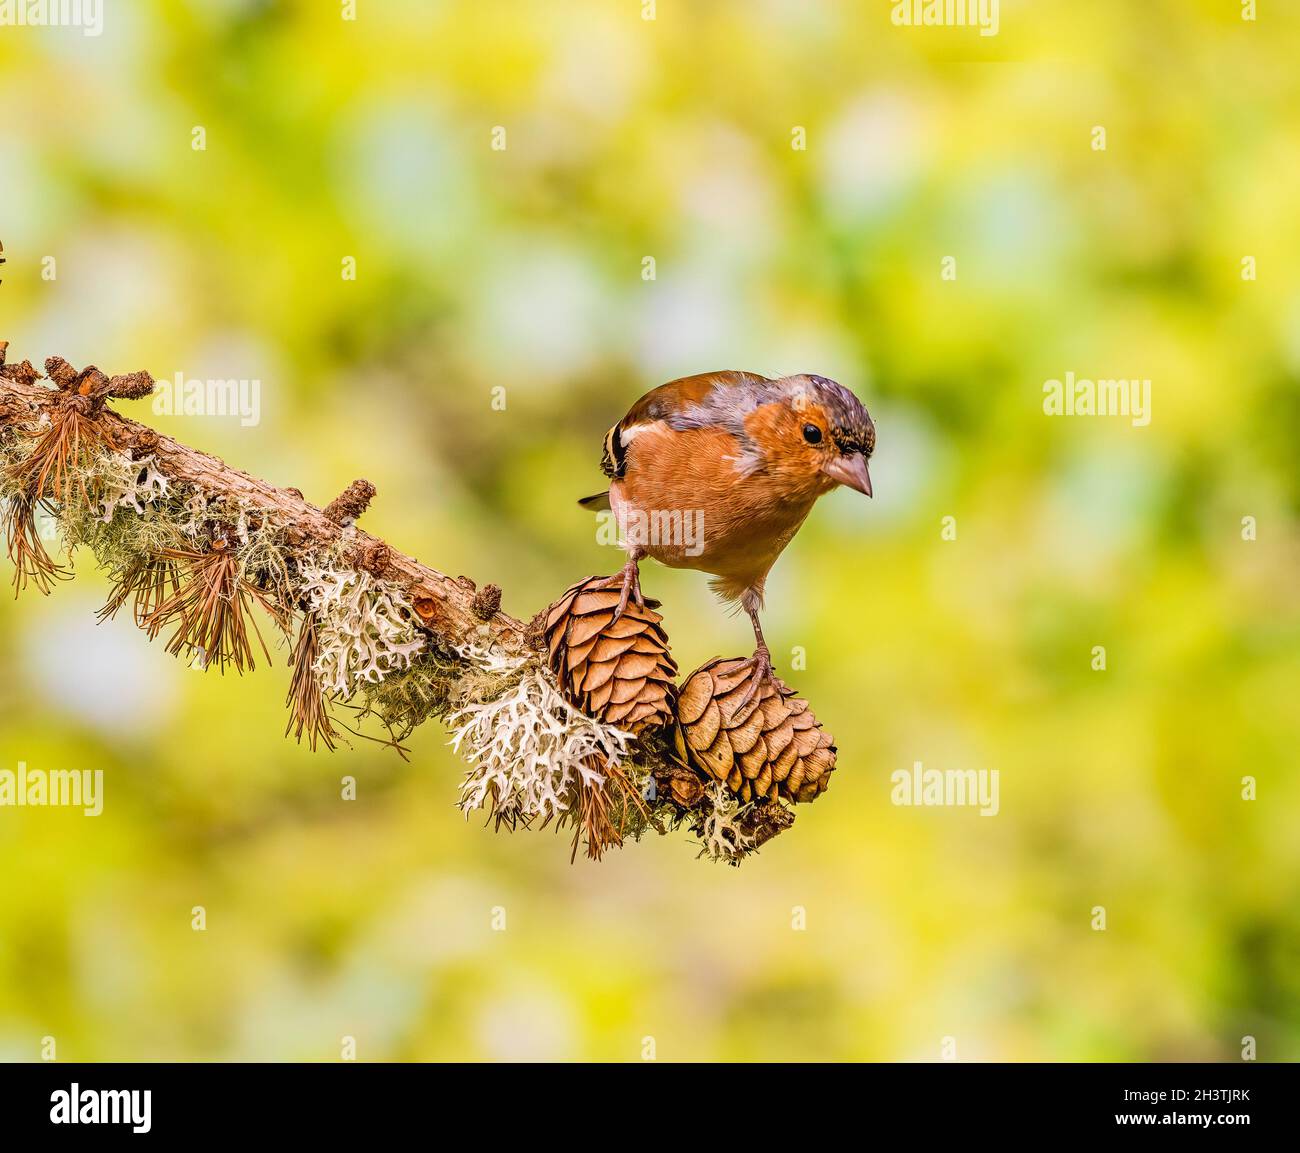 Cute Chaffinch Perched on Conifer Tree Branch Stock Photo